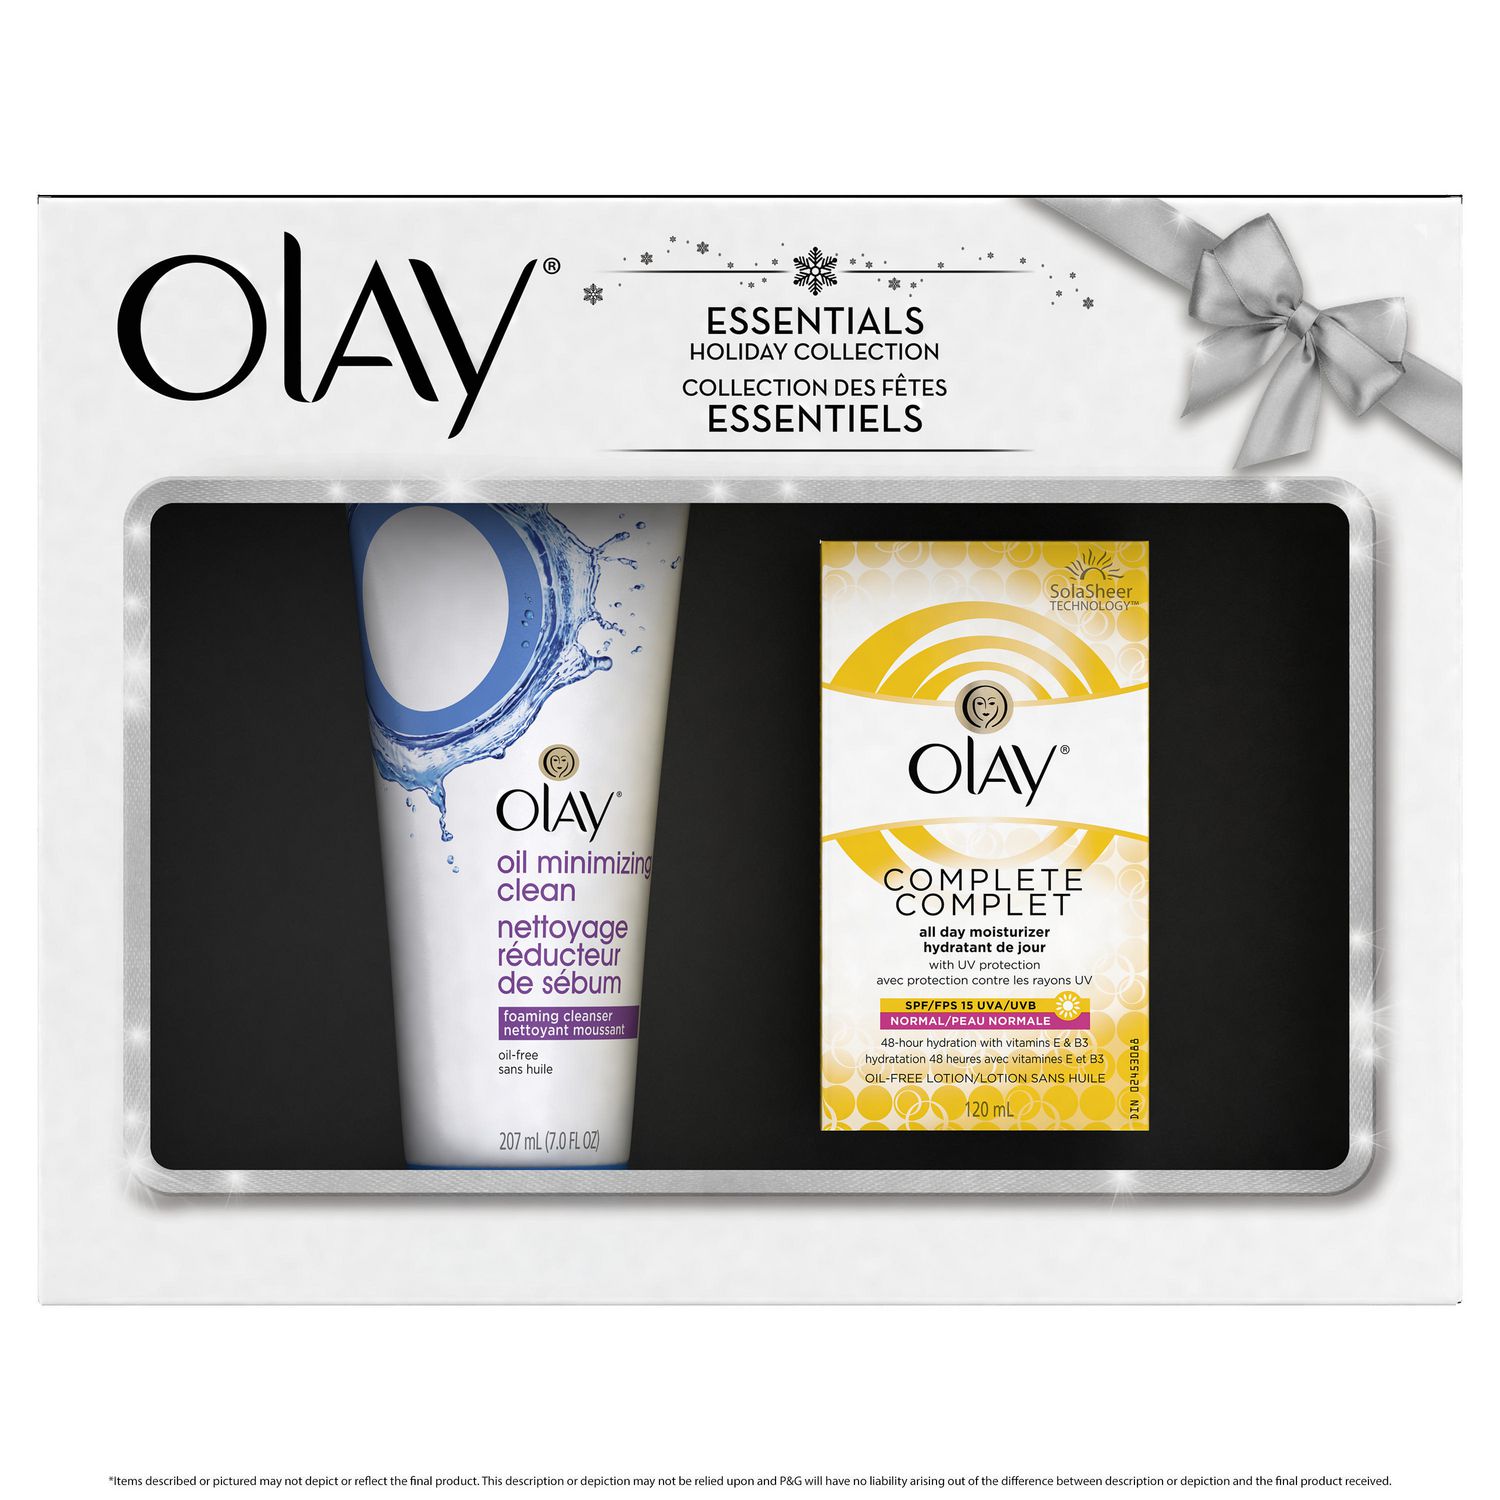 Olay Essentials Holiday Collection Pack Walmart Canada